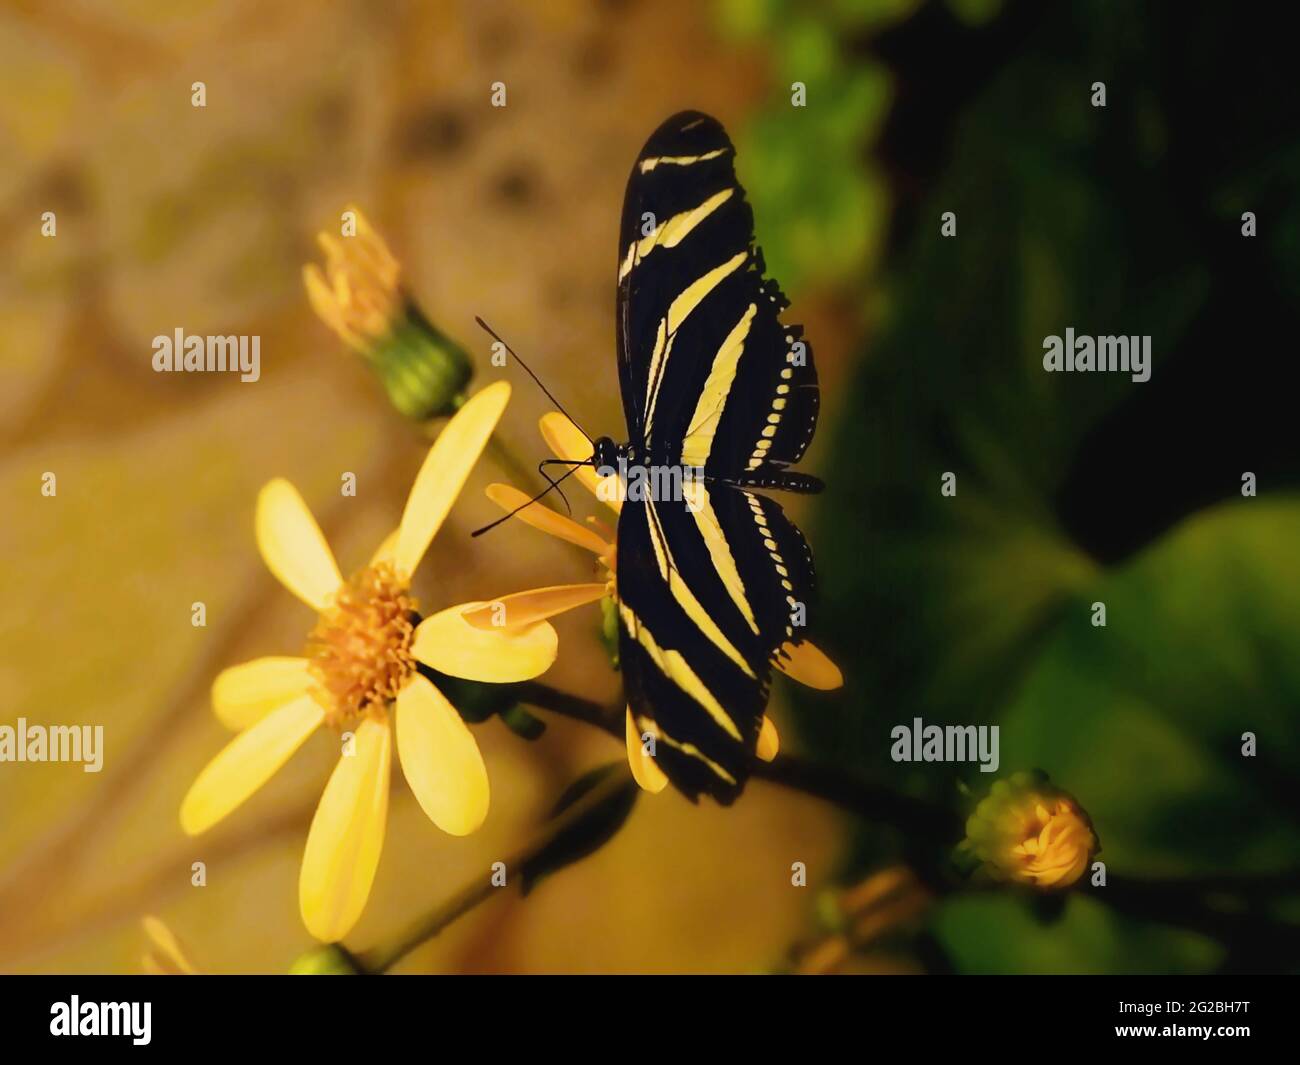 A black and yellow striped butterfly, a 'Heliconius charitonius', sits on a yellow flower with its wings wide open. Occurrence in Costa Rica, Malaysia Stock Photo